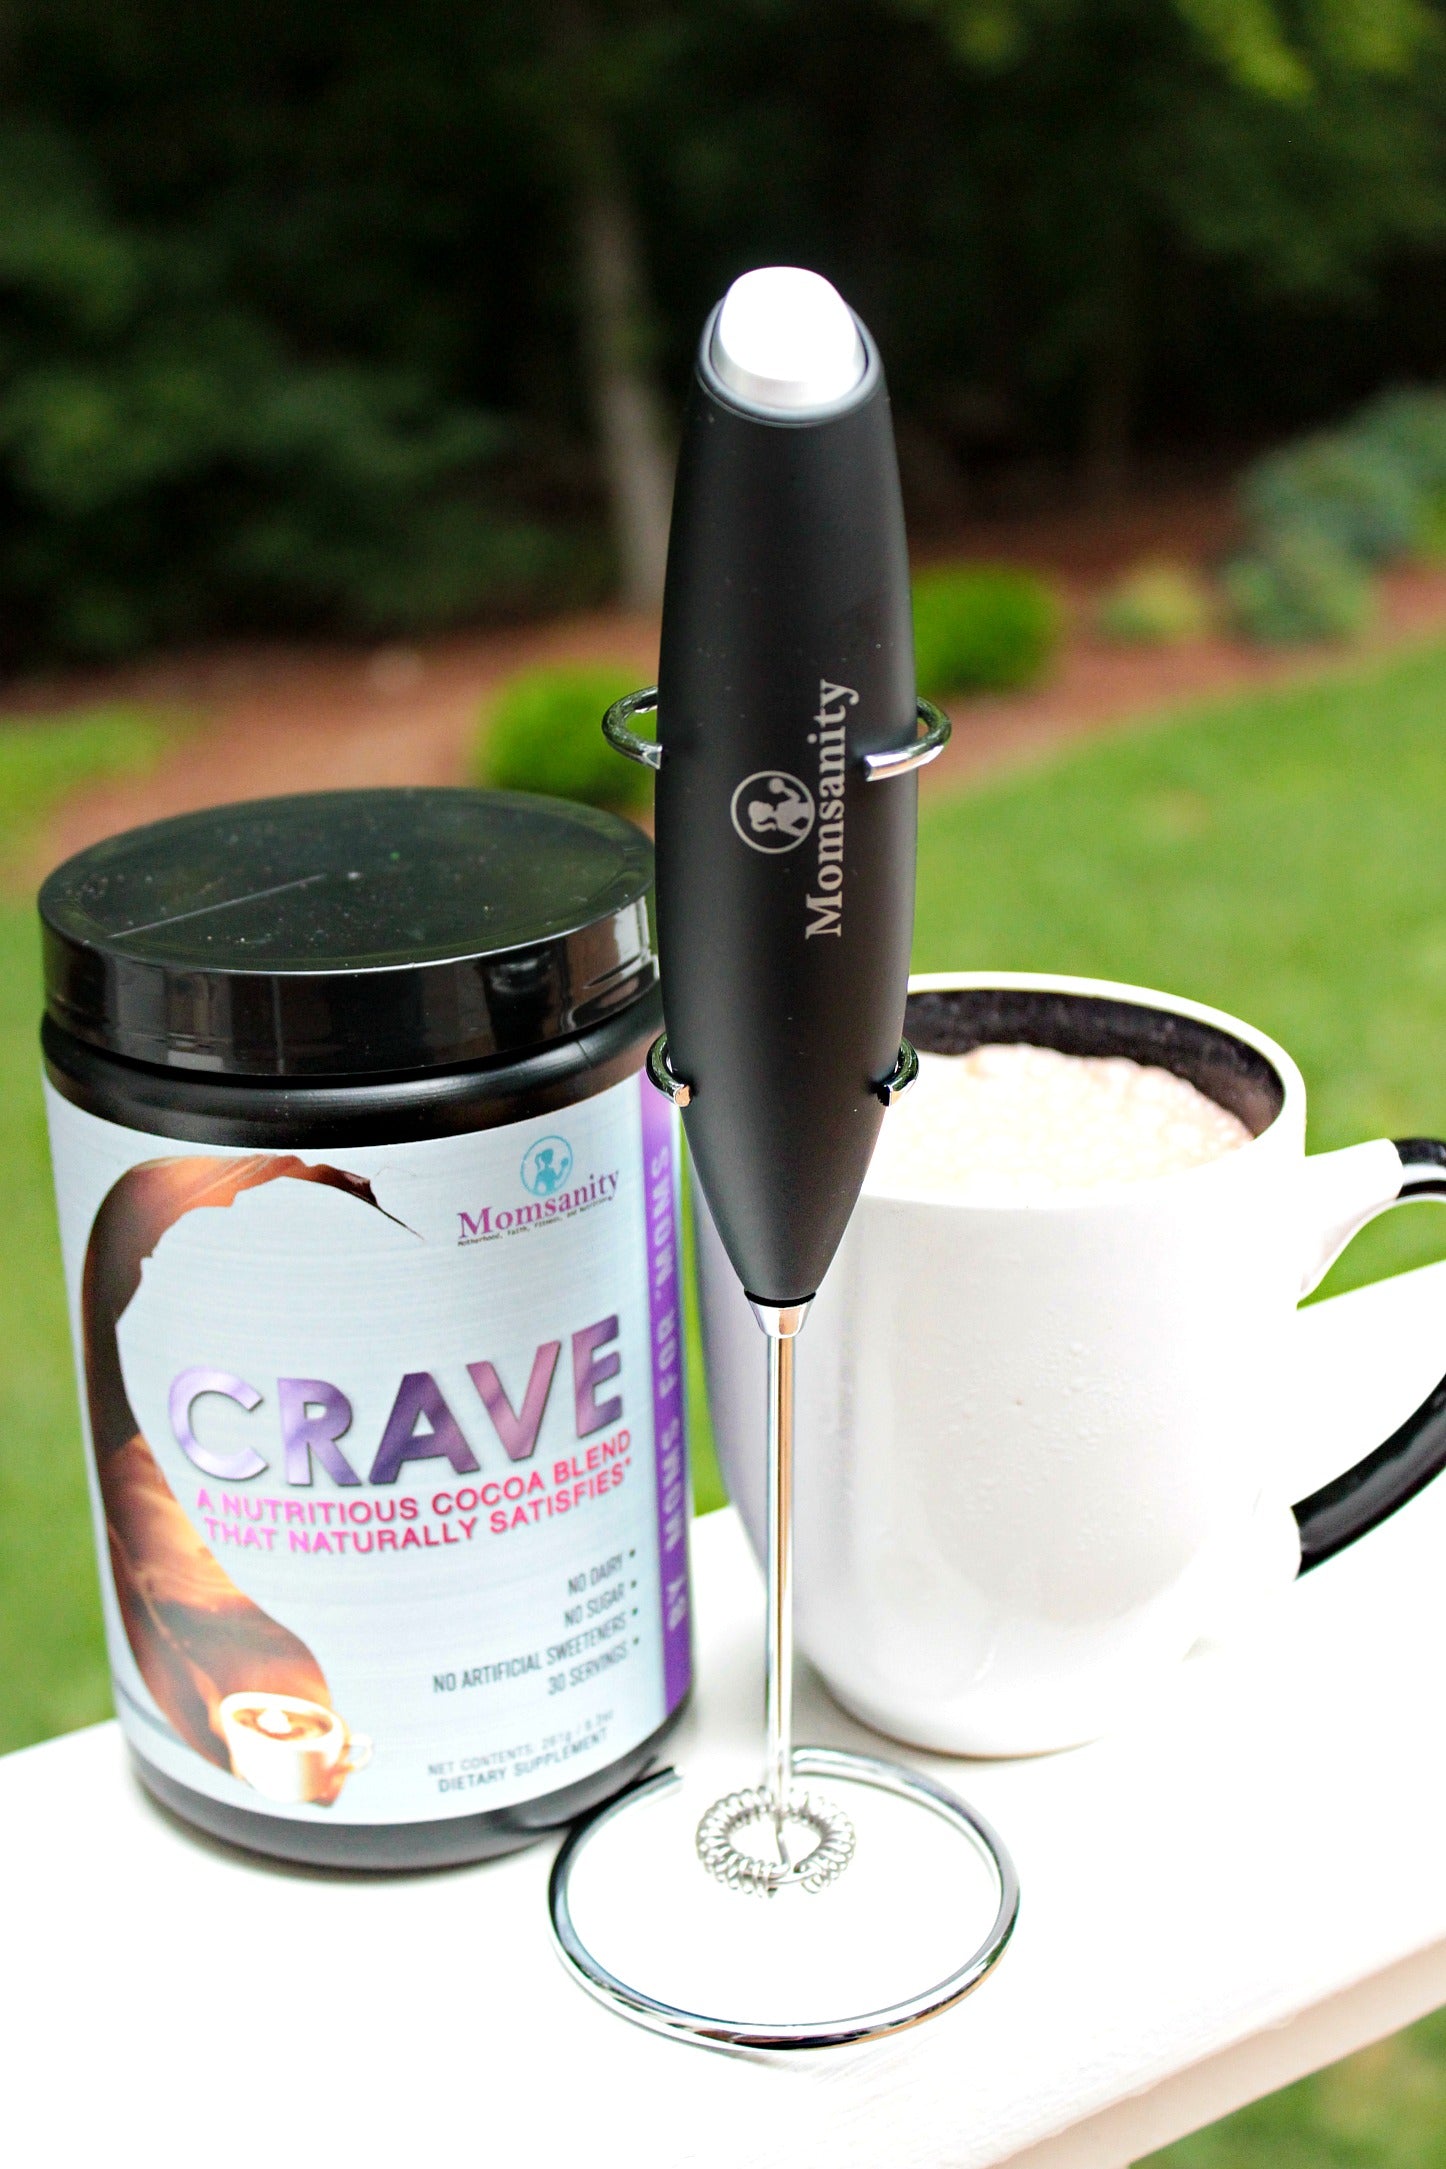 The Power Frother - Best Milk Frother for Coffee and Supplements